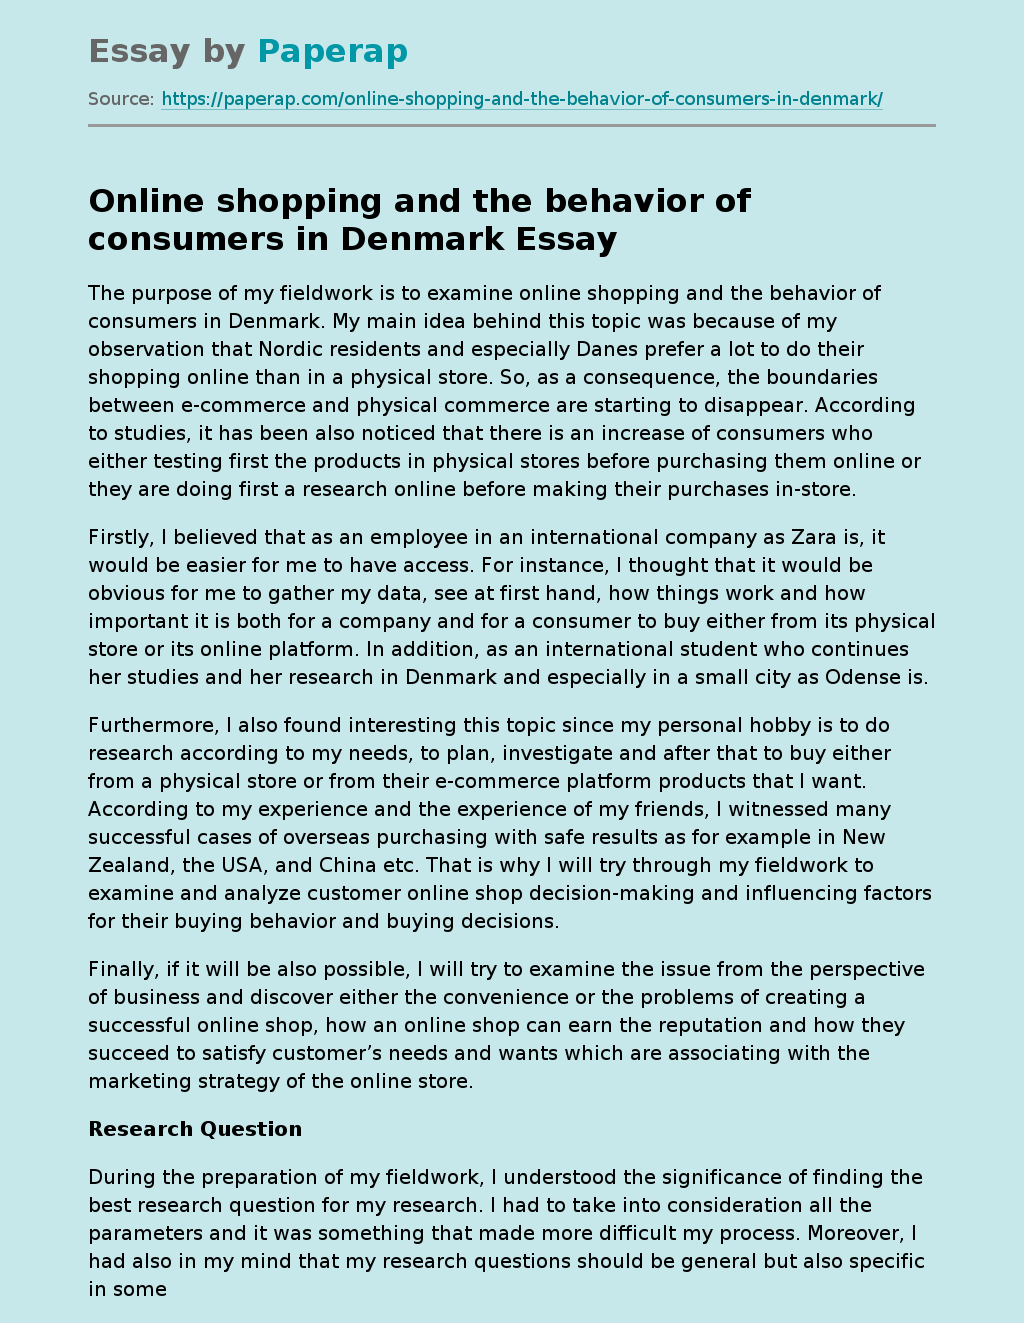 Online shopping and the behavior of consumers in Denmark